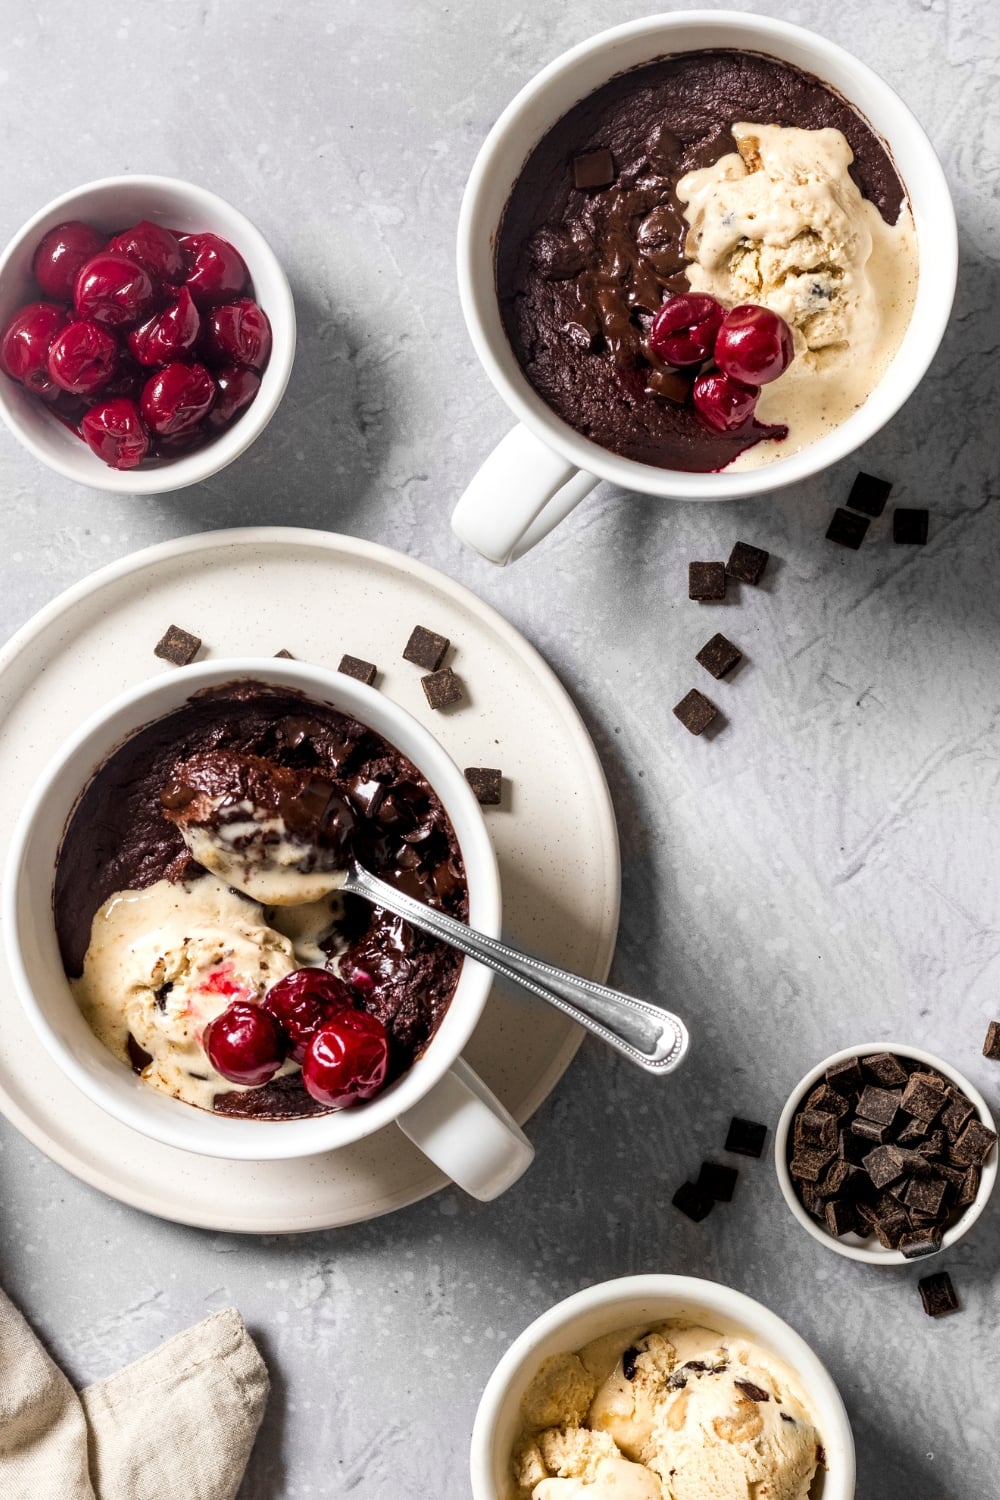 Top View of Chocolate Brownies in a Mug Topped With Cherries and Ice Cream